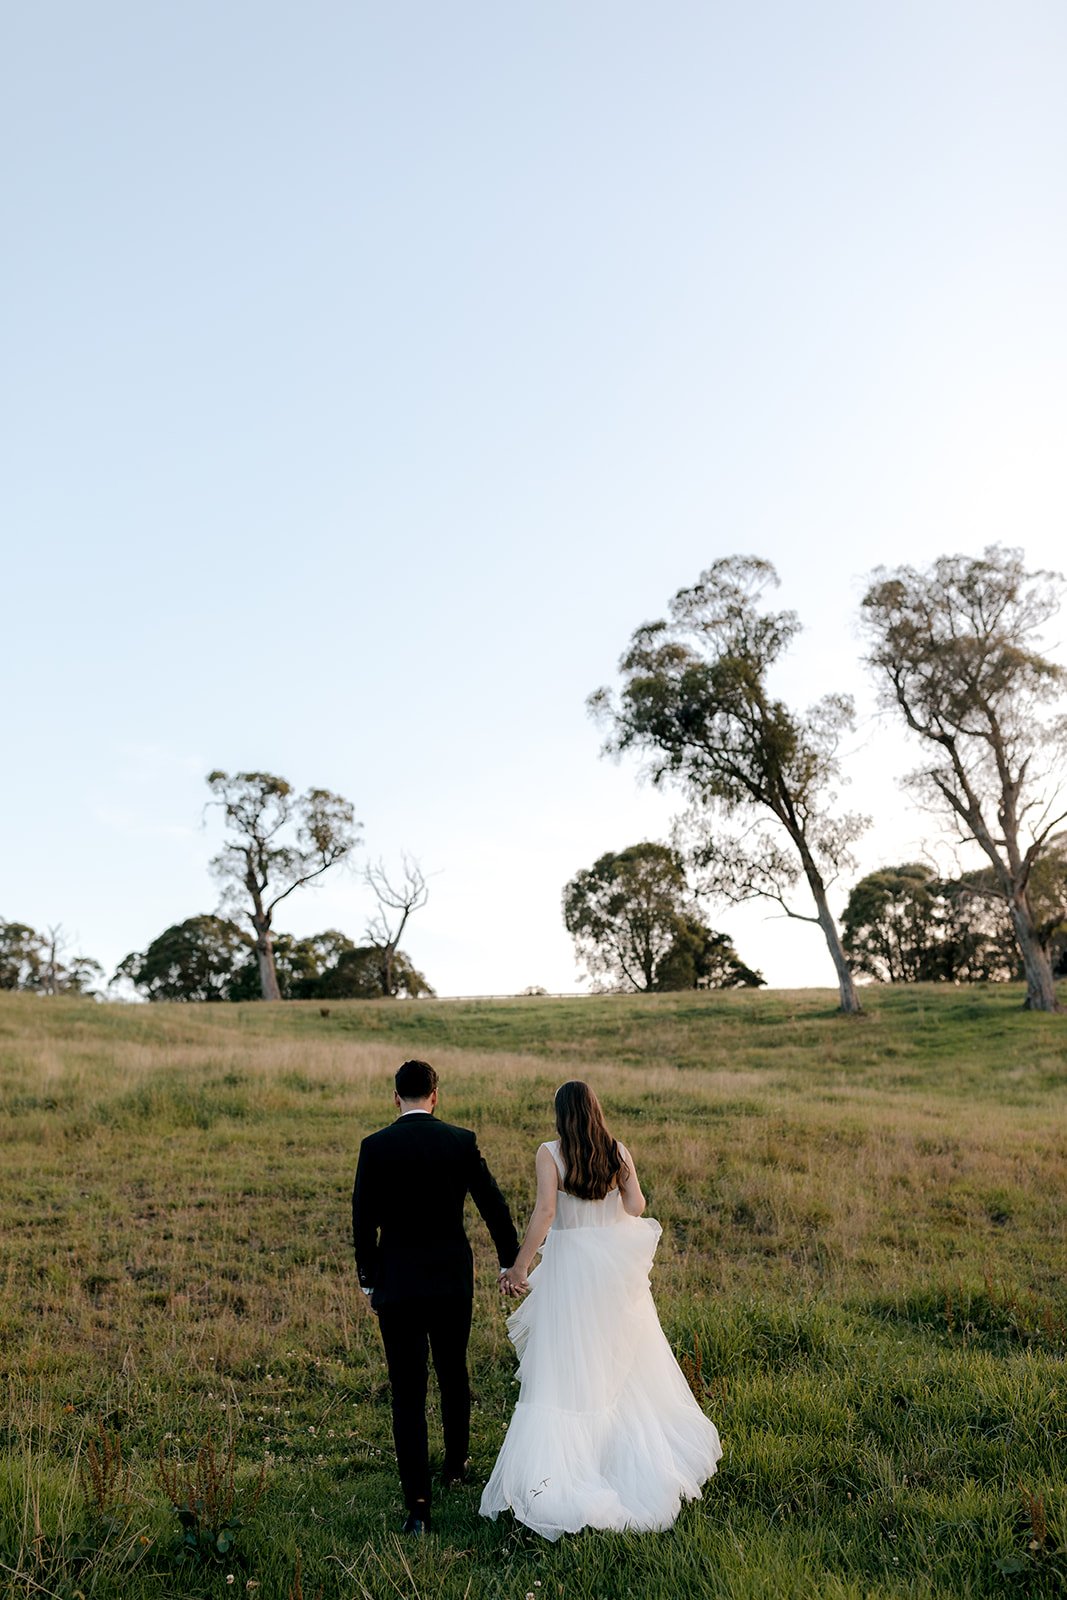 Bride & groom walking hand-in-hand at blue hour during their elegant country wedding.